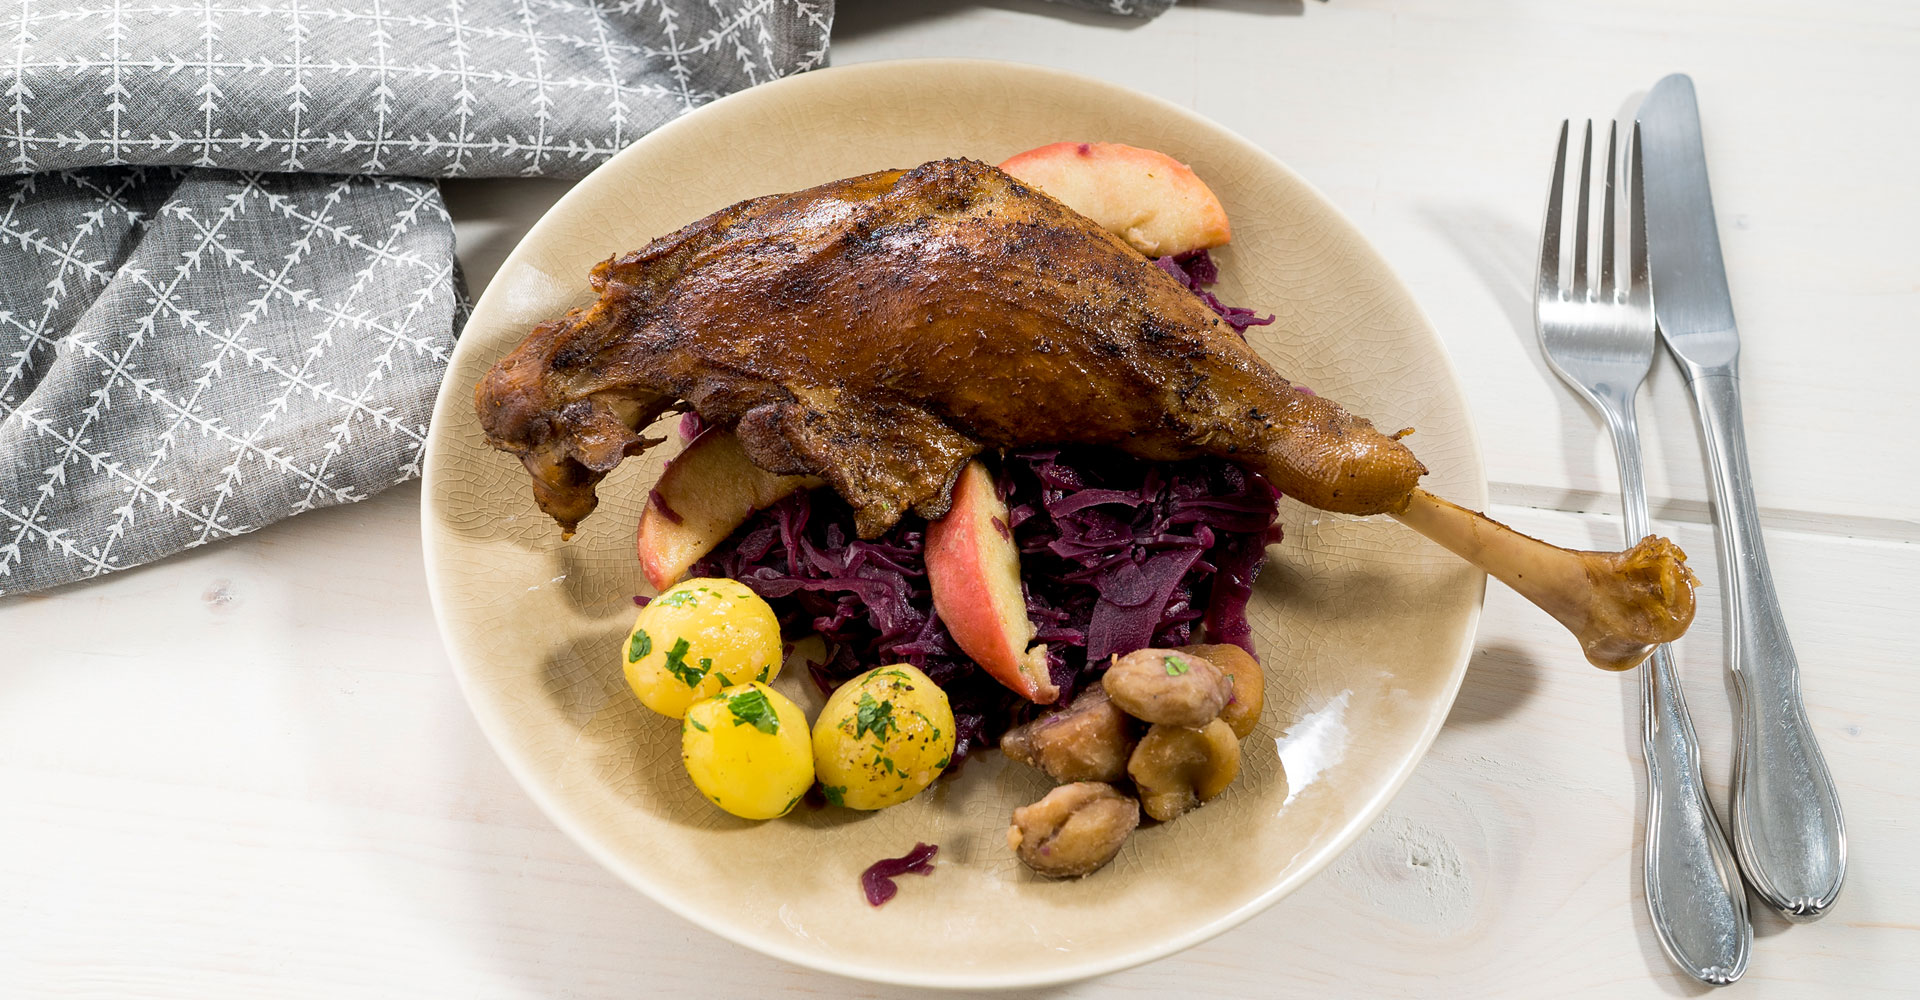 Goose legs with glazed apples, chestnut, red cabbage and potatoes